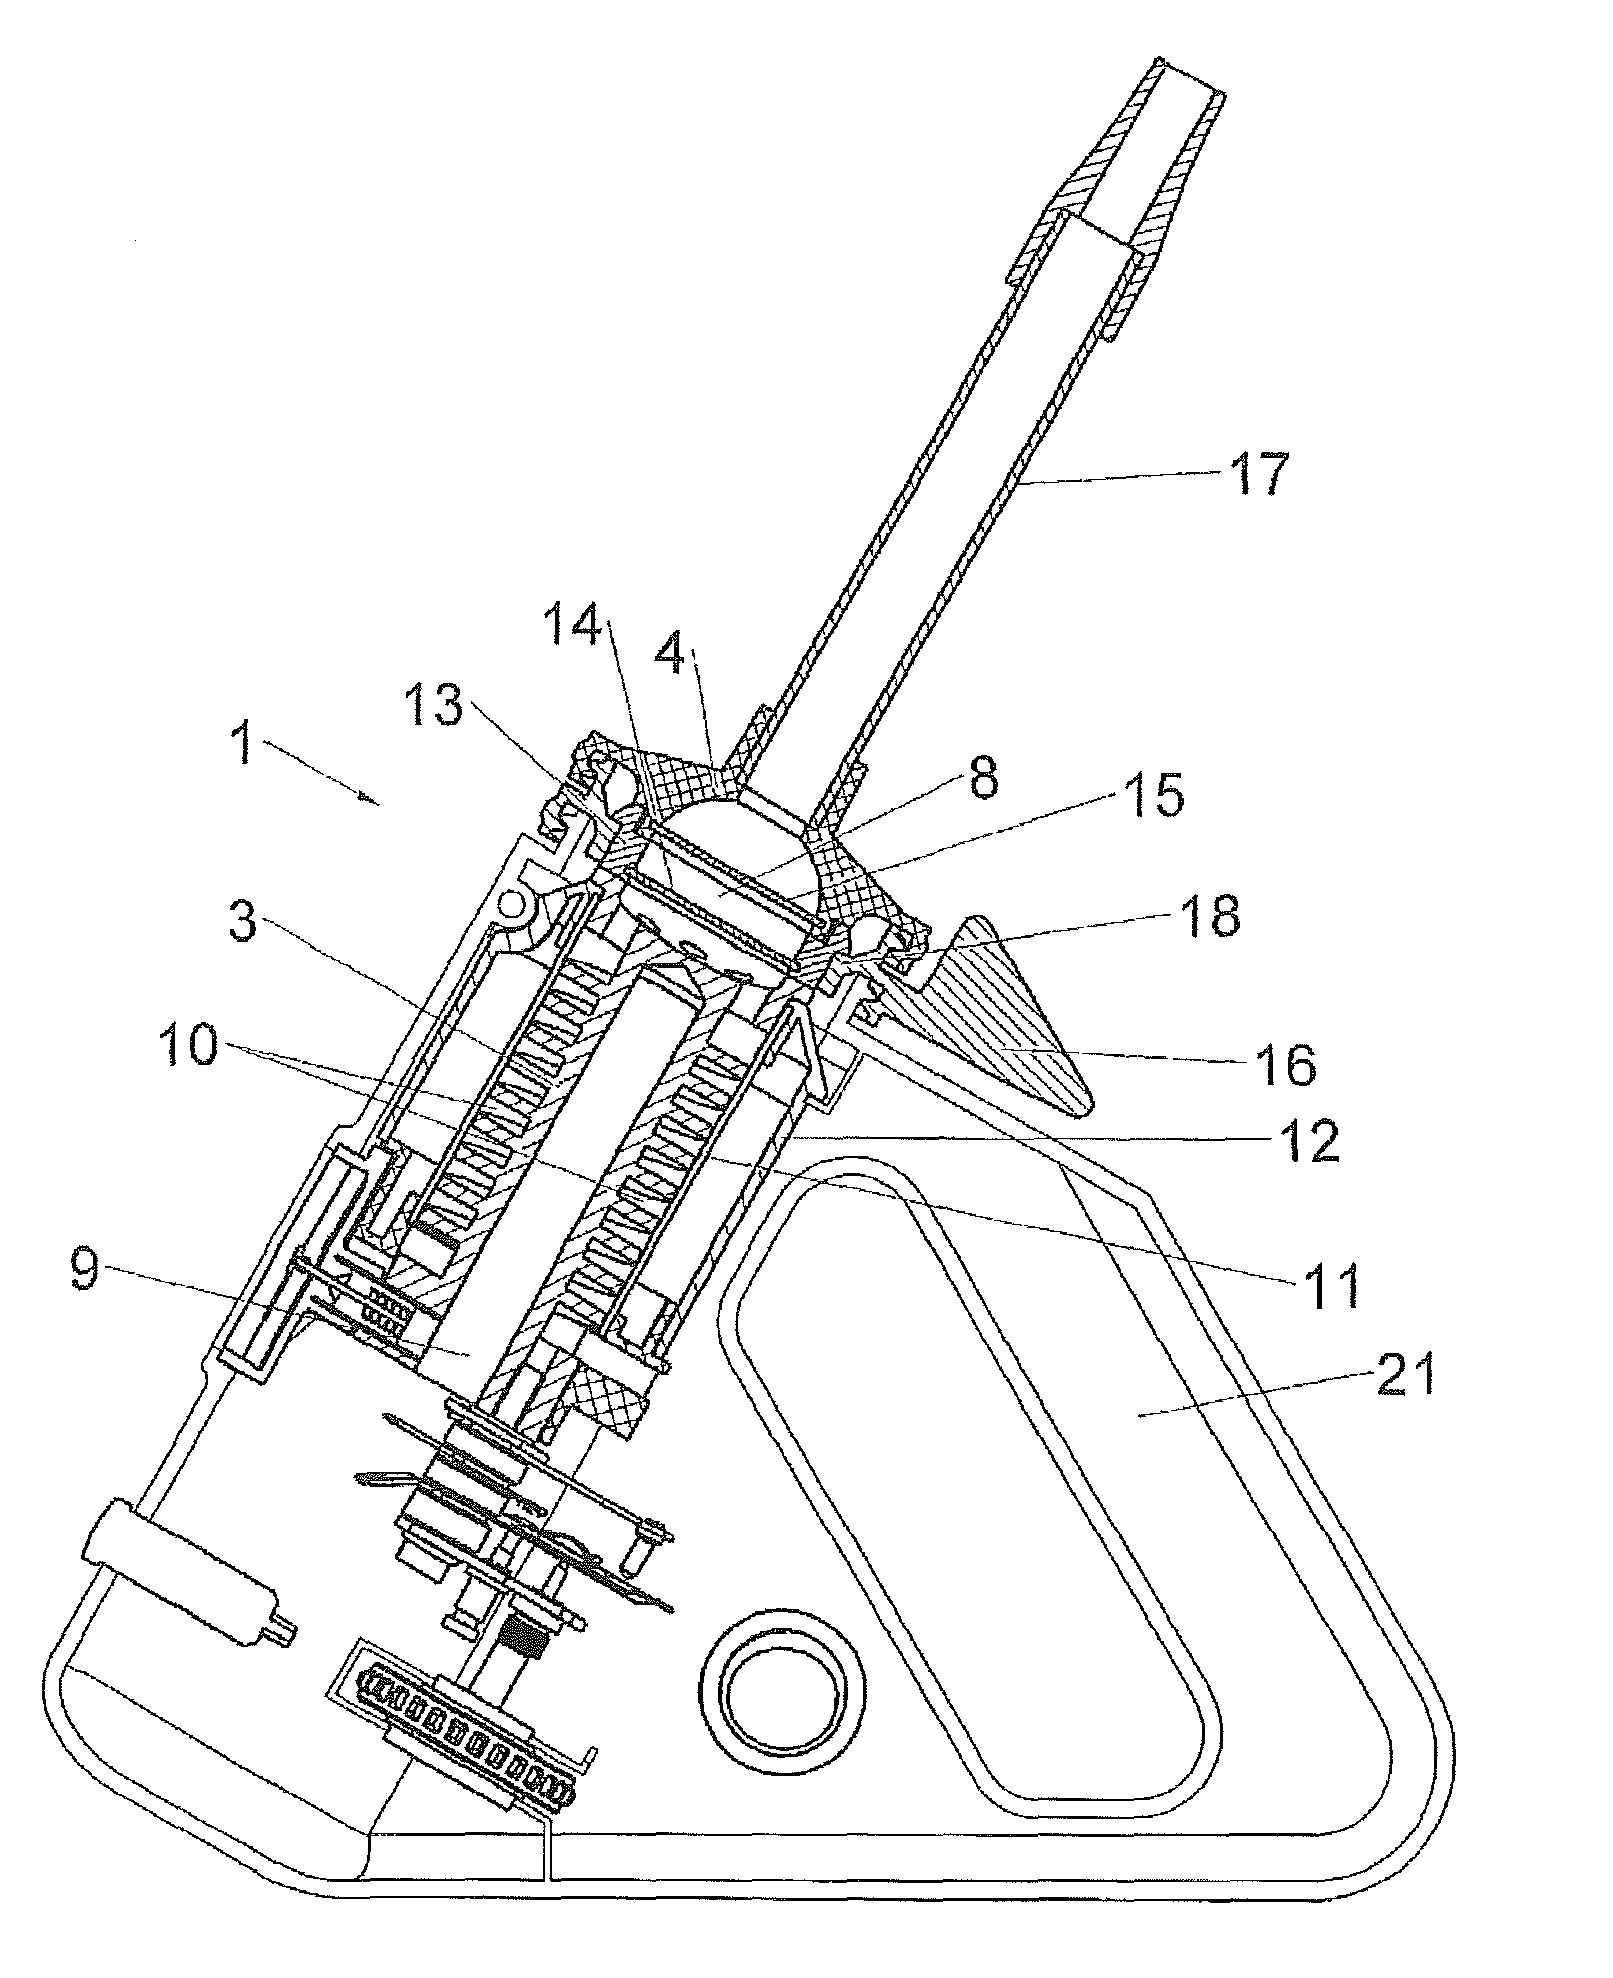 Vaporizer with combined air and radiation heating